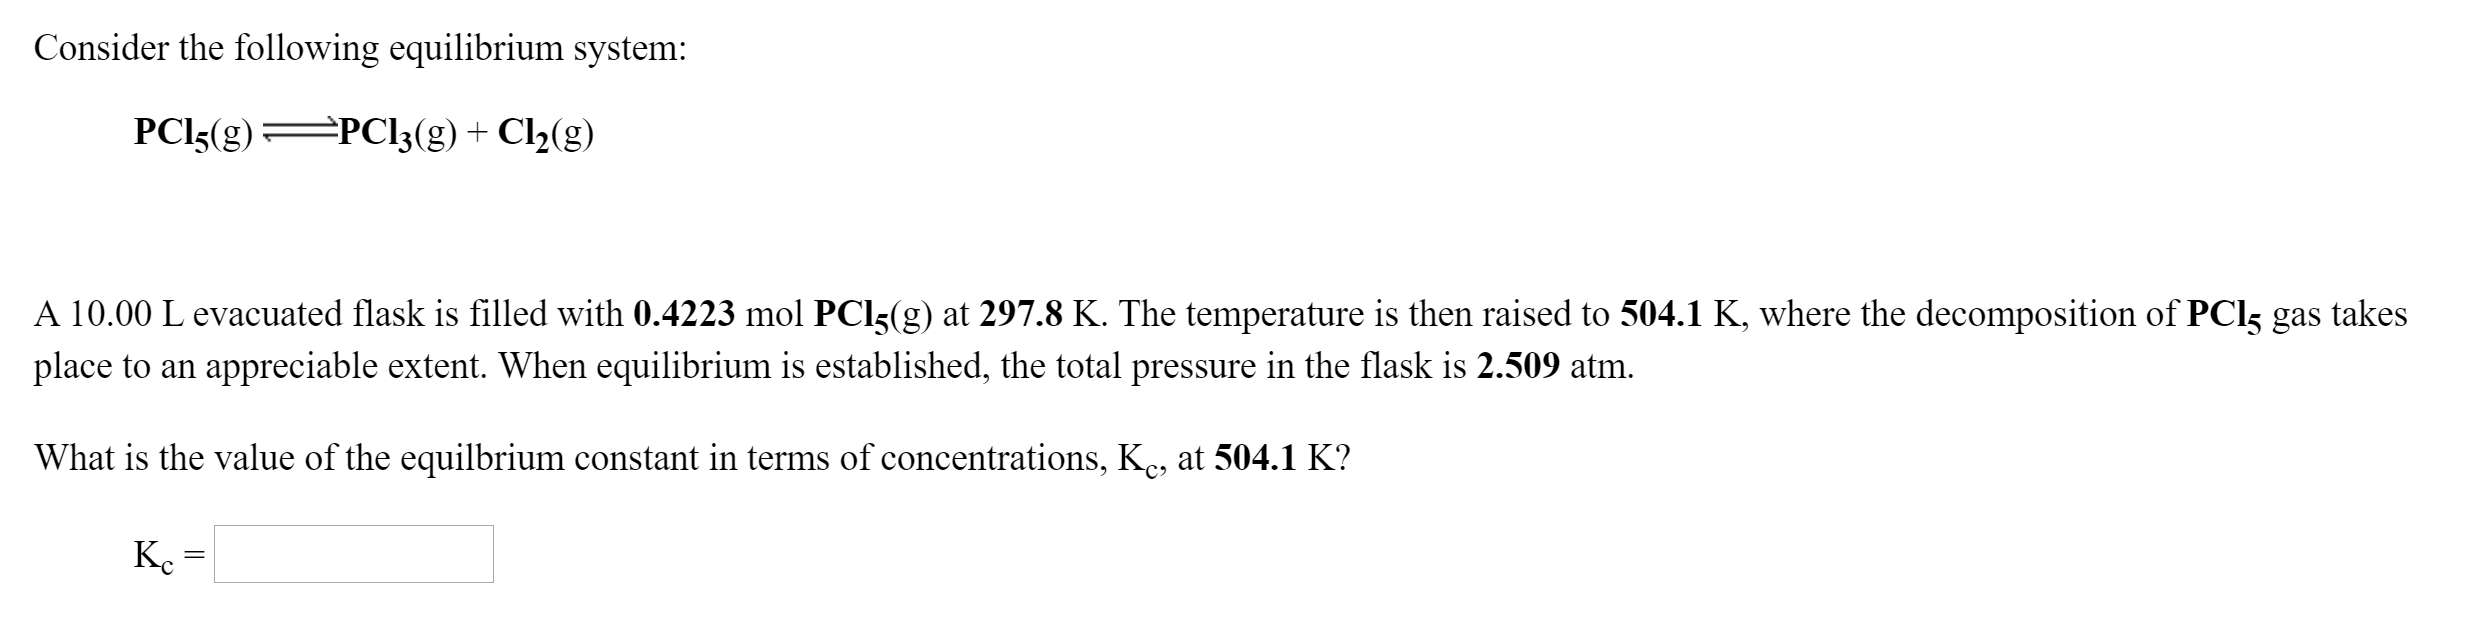 Consider the following equilibrium system:
PCI3(g)=
=PC!3(g) + Cl2(g)
A 10.00 L evacuated flask is filled with 0.4223 mol PCI5(g) at 297.8 K. The temperature is then raised to 504.1 K, where the decomposition of PCI5 gas
place to an appreciable extent. When equilibrium is established, the total pressure in the flask is 2.509 atm.
takes
What is the value of the equilbrium constant in terms of concentrations, K., at 504.1 K?
Ke
